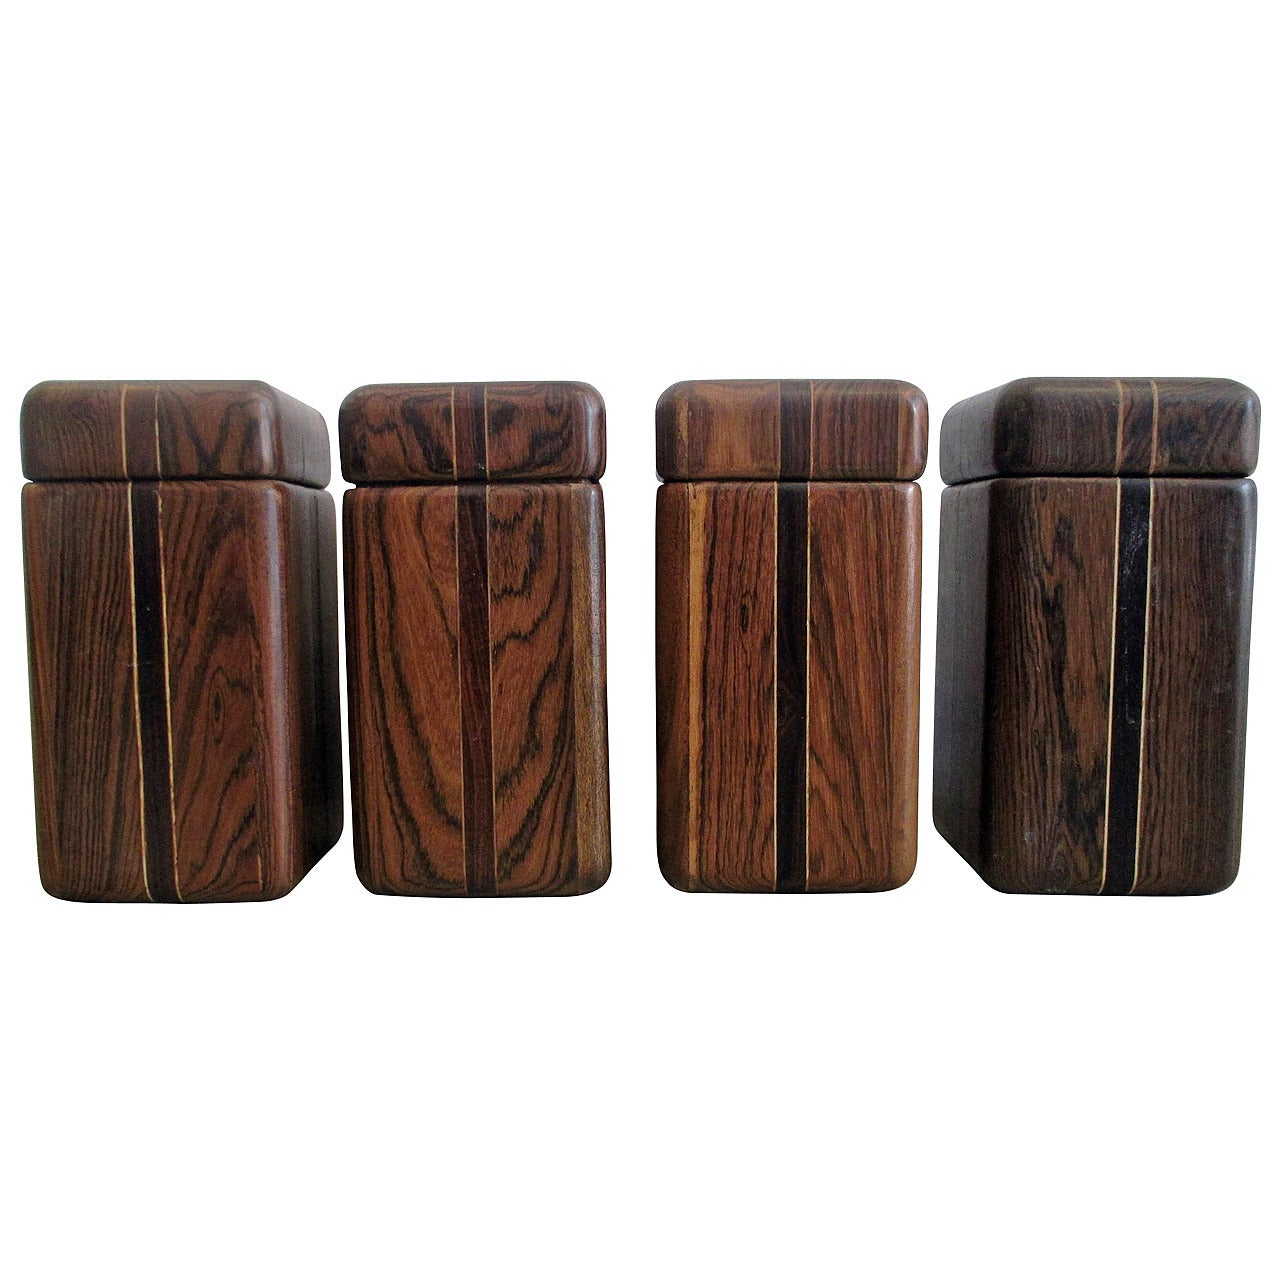 Four Spice Boxes in Cocobolo by Don Shoemaker, circa 1960